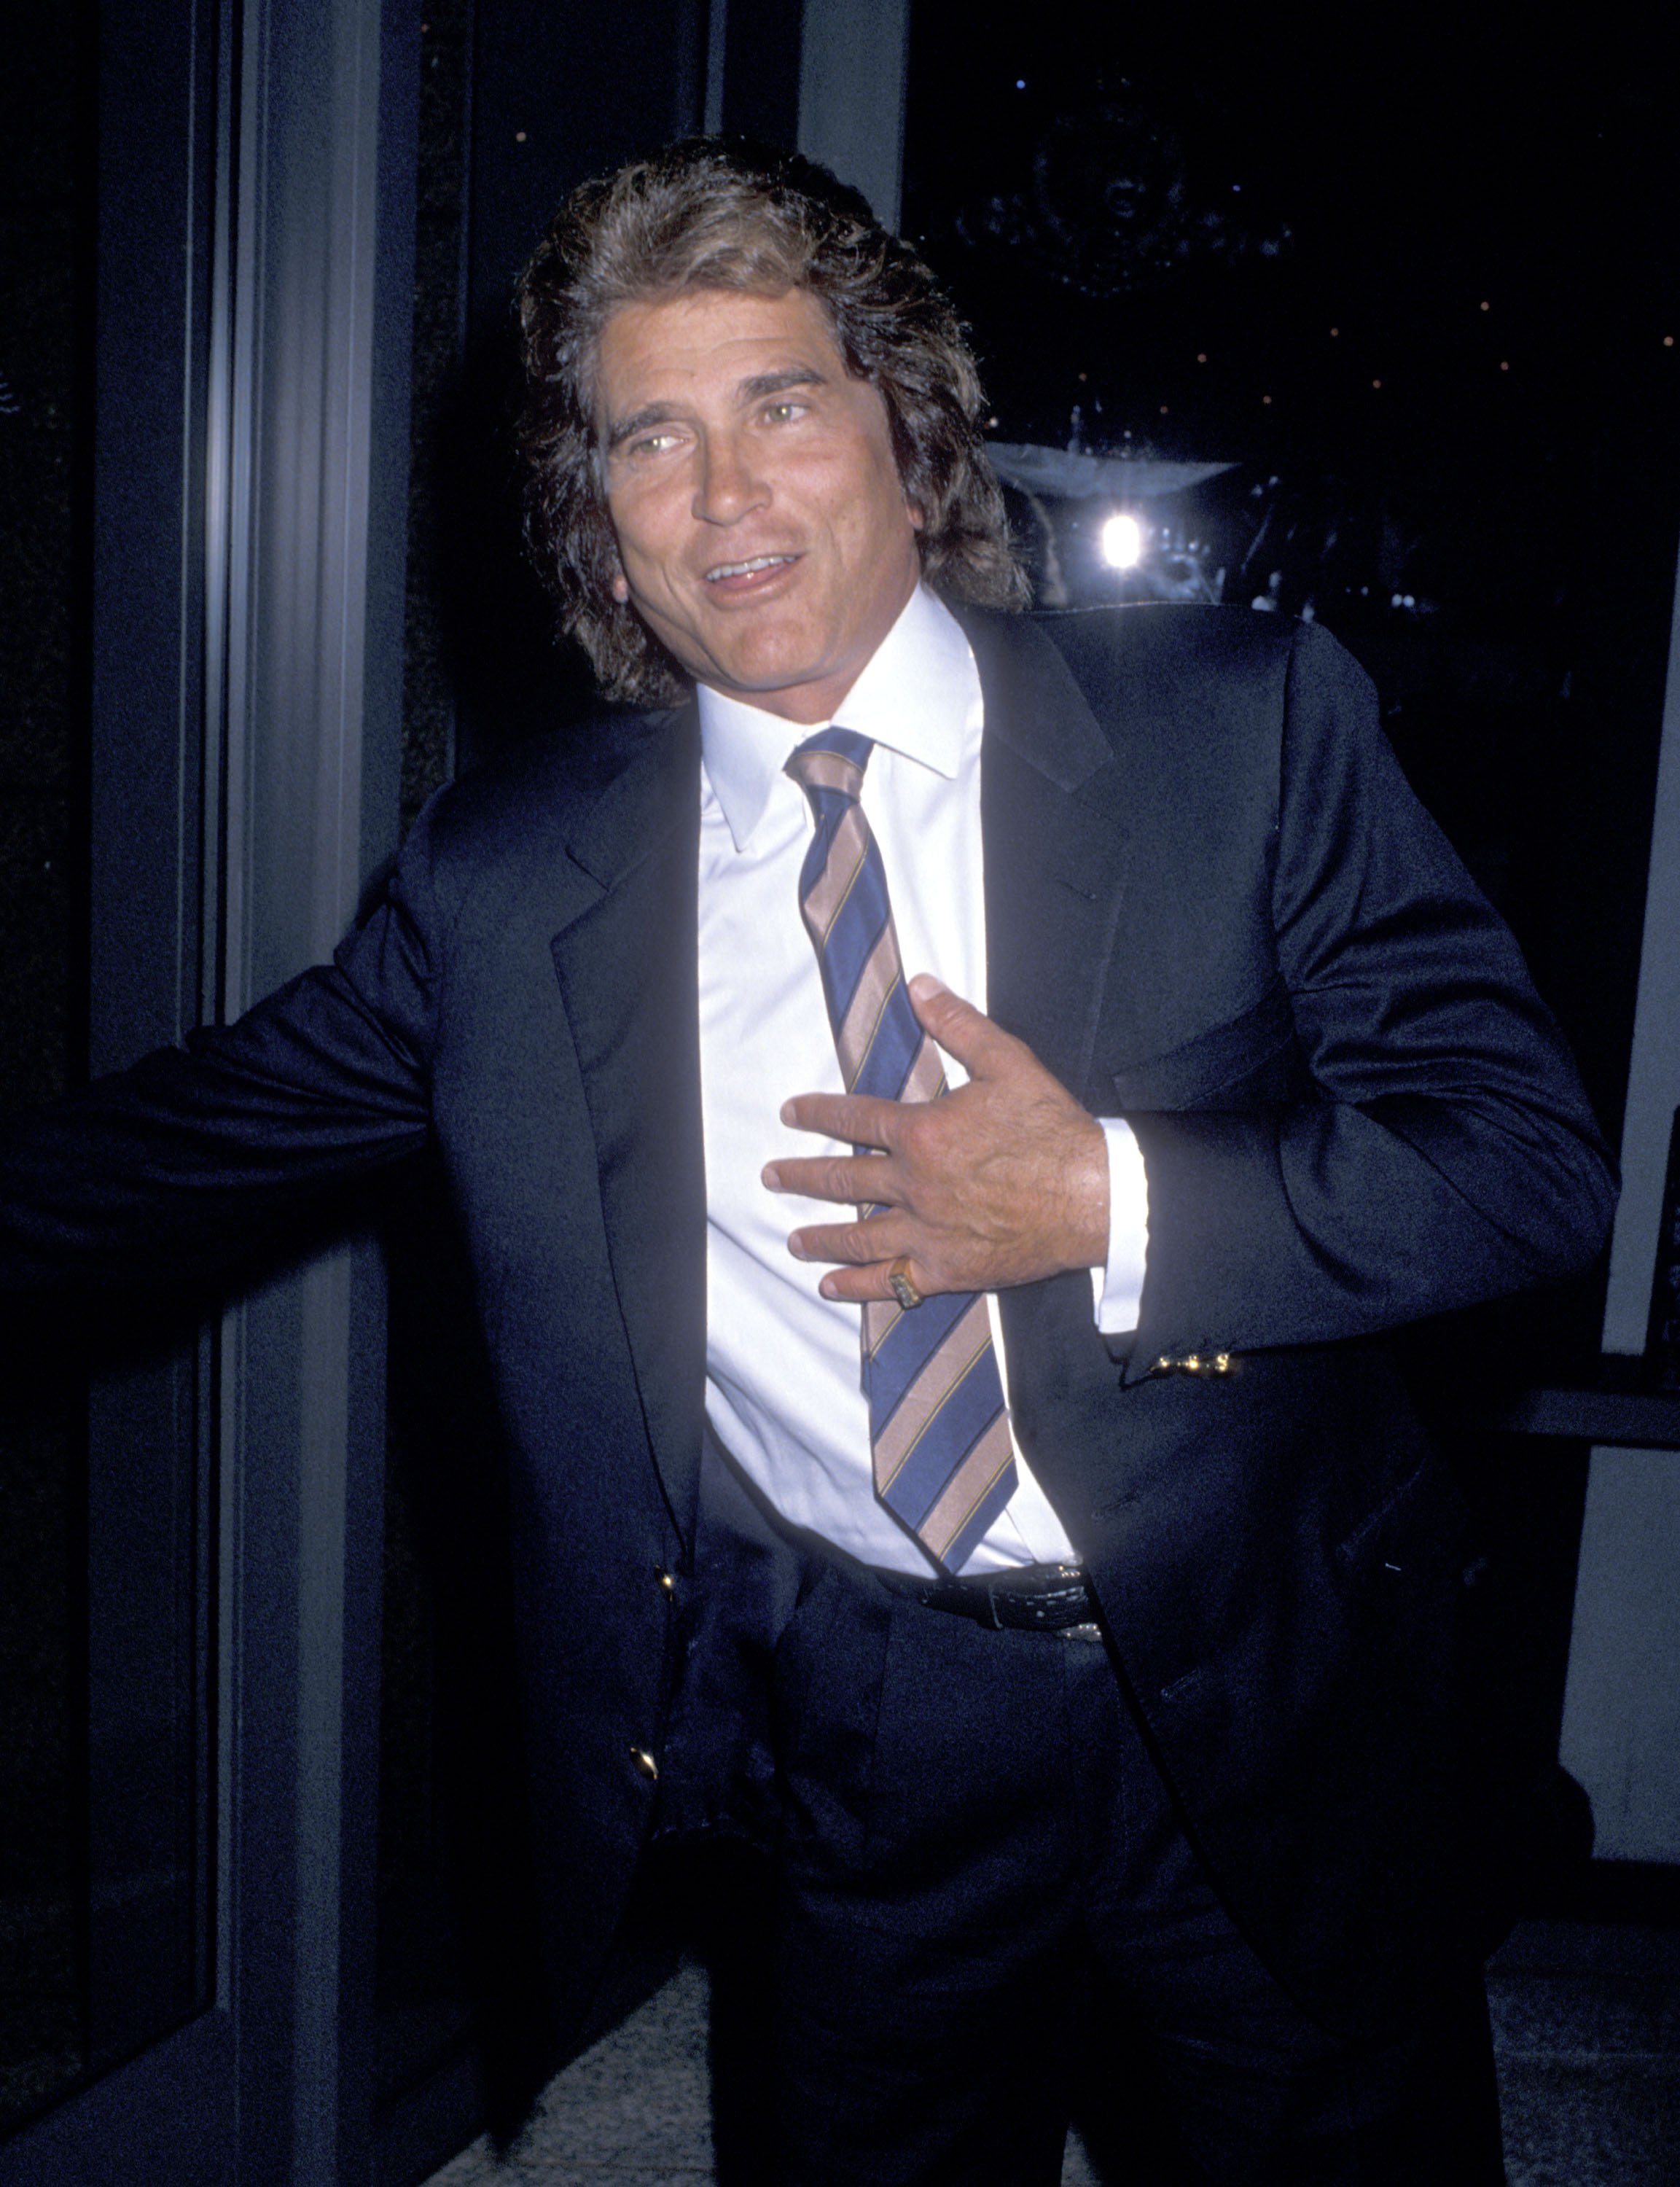 Michael Landon attends the National Down Syndrome Congress' Second Annual Michael Landon Celebrity Gala on October 15, 1988, at Filmland Center in Culver City, California. | Source: Getty Images